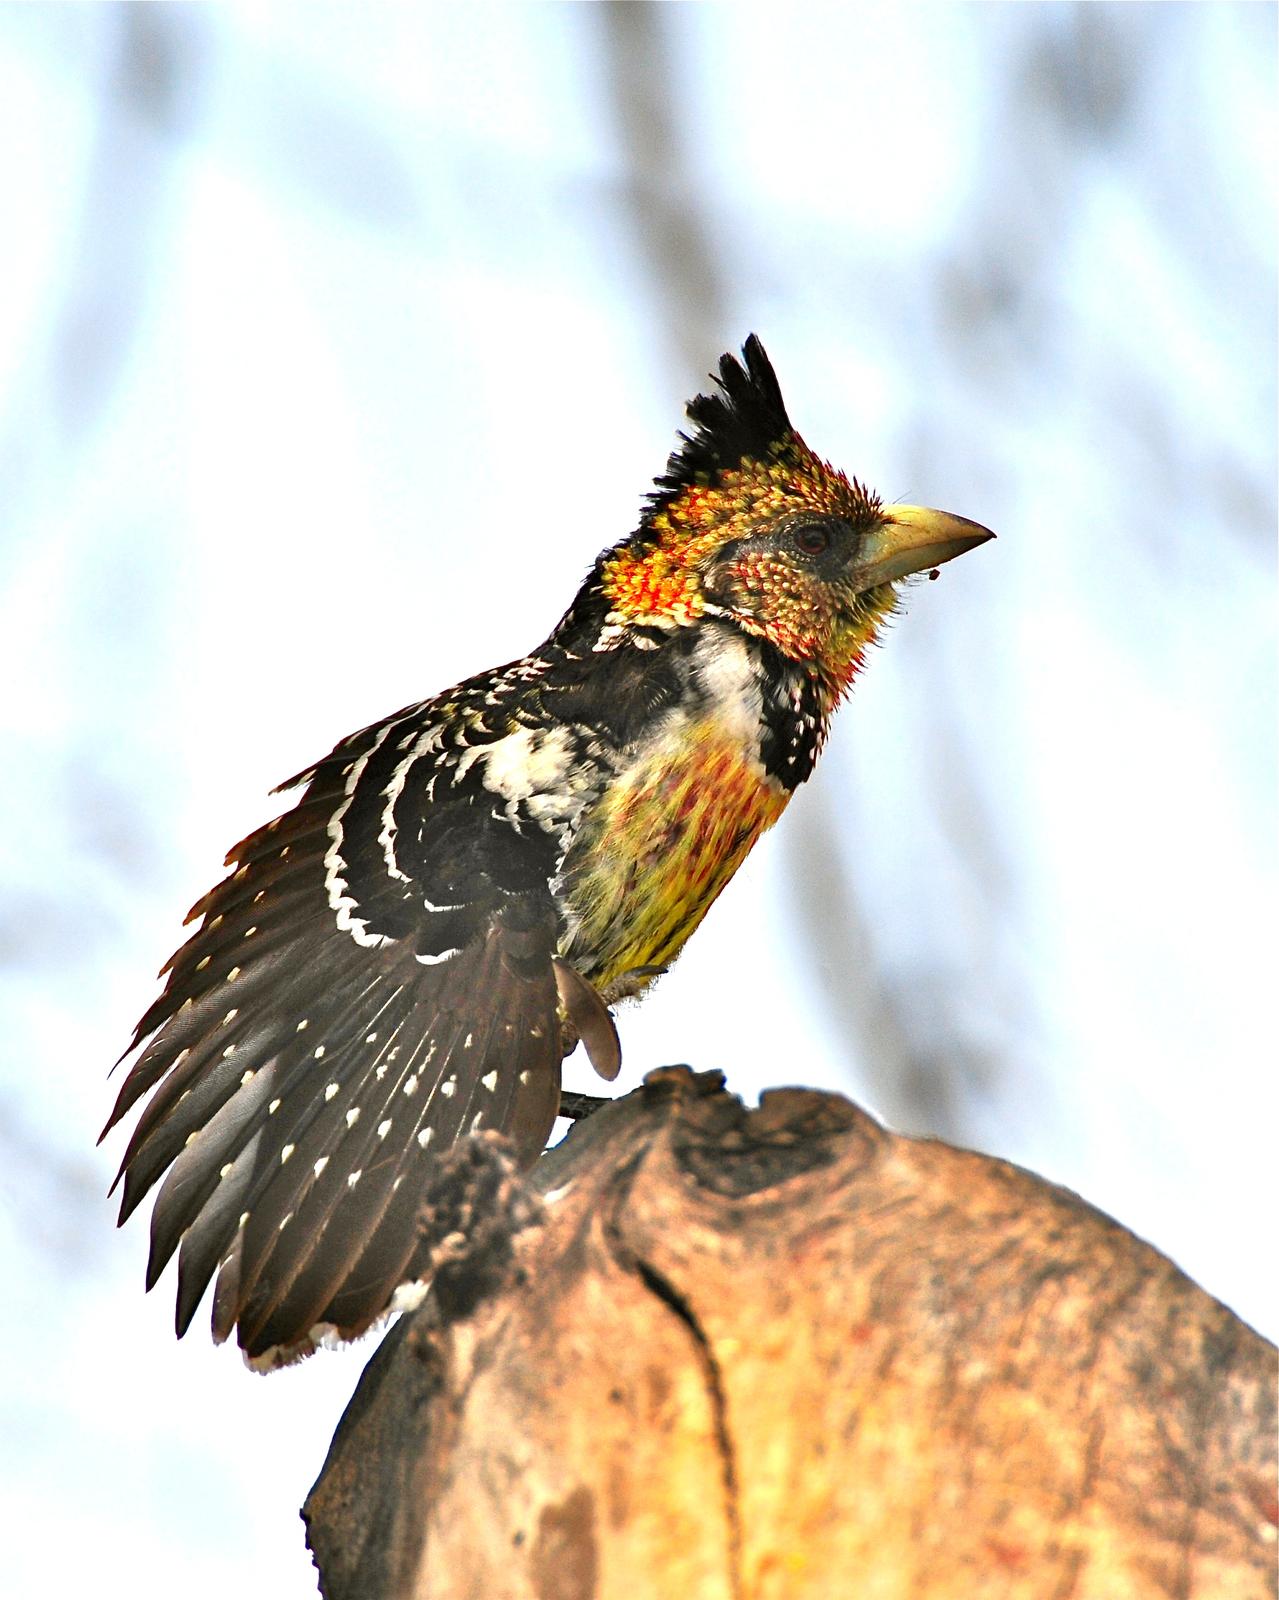 Crested Barbet Photo by Gerald Friesen